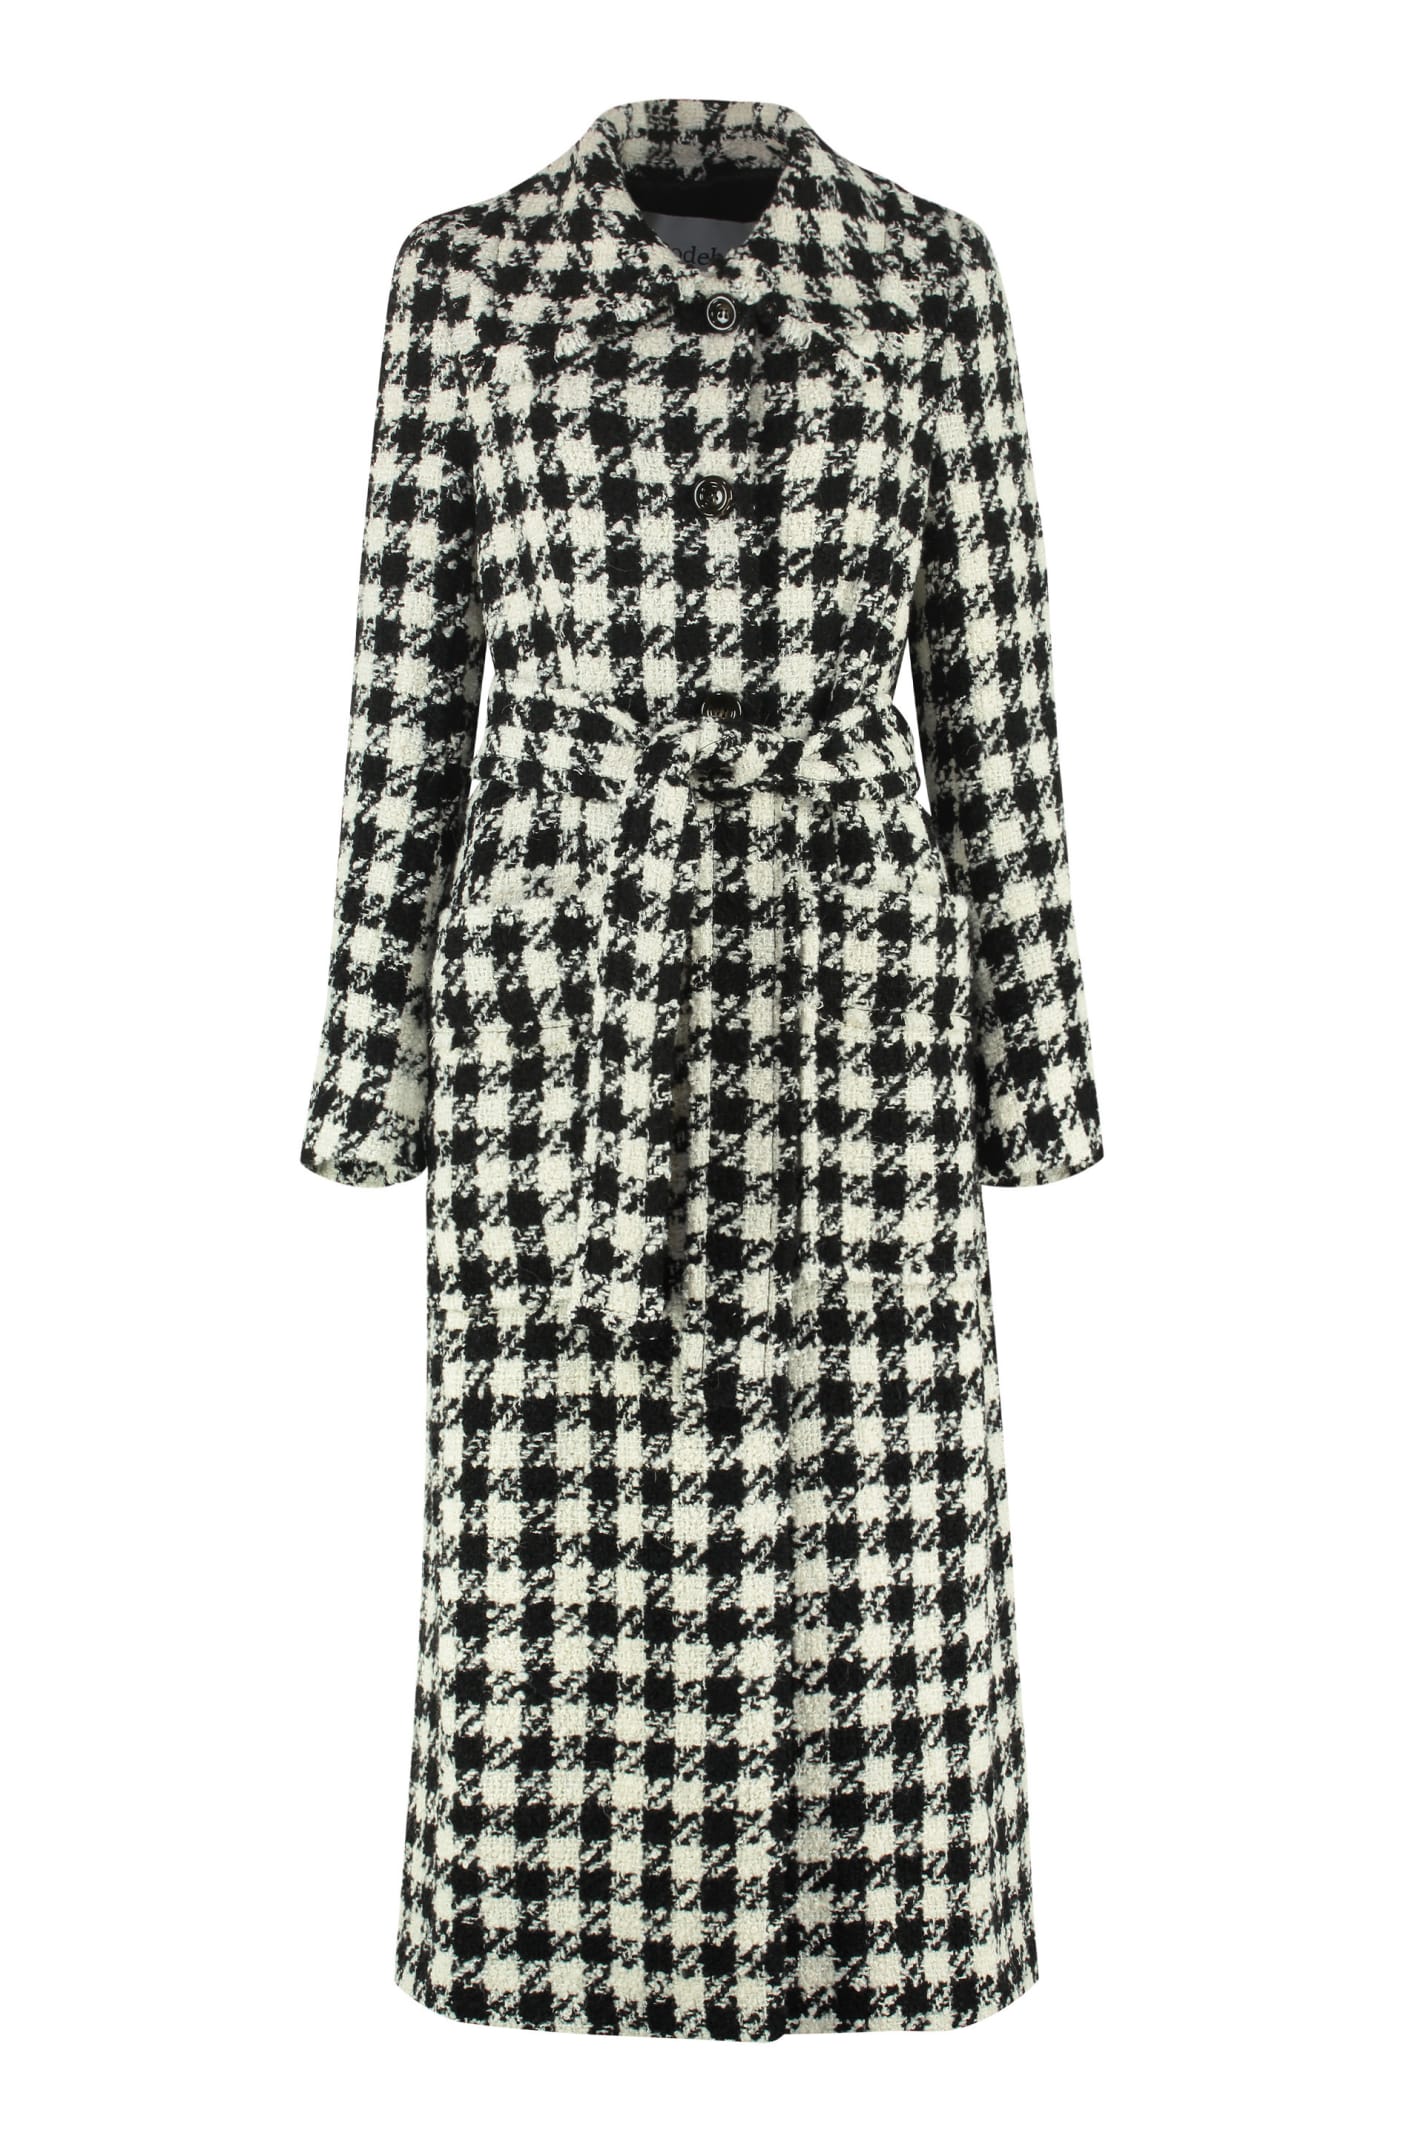 Rodebjer Brooklyn Houndstooth Coat